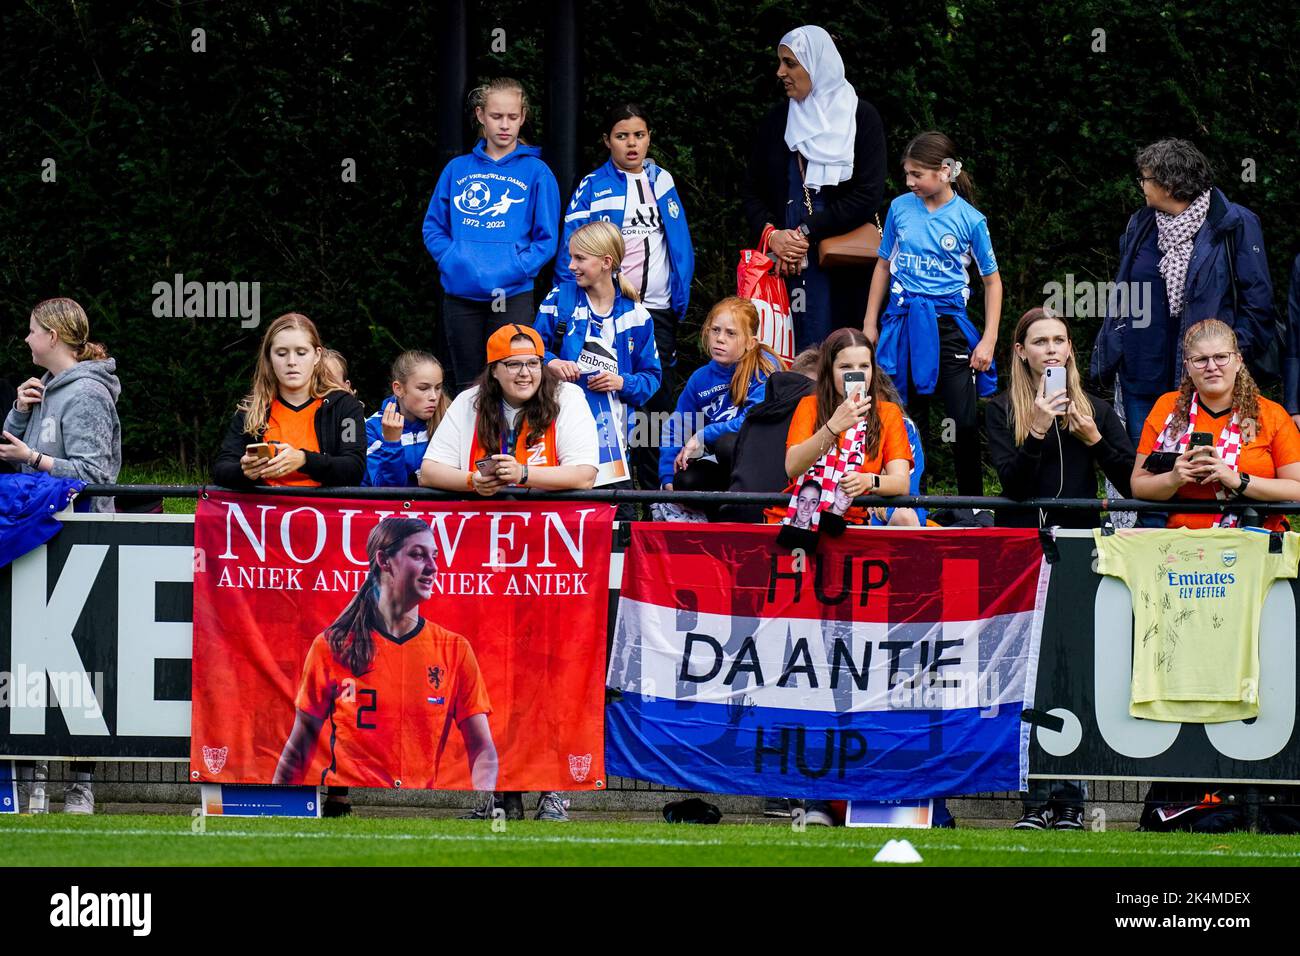 ZEIST, NETHERLANDS - OCTOBER 3: Supporter of the Netherlands during a Training Session of the Netherlands Women’s Football Team at the KNVB Campus on October 3, 2022 in Zeist, Netherlands (Photo by Joris Verwijst/Orange Pictures) Stock Photo